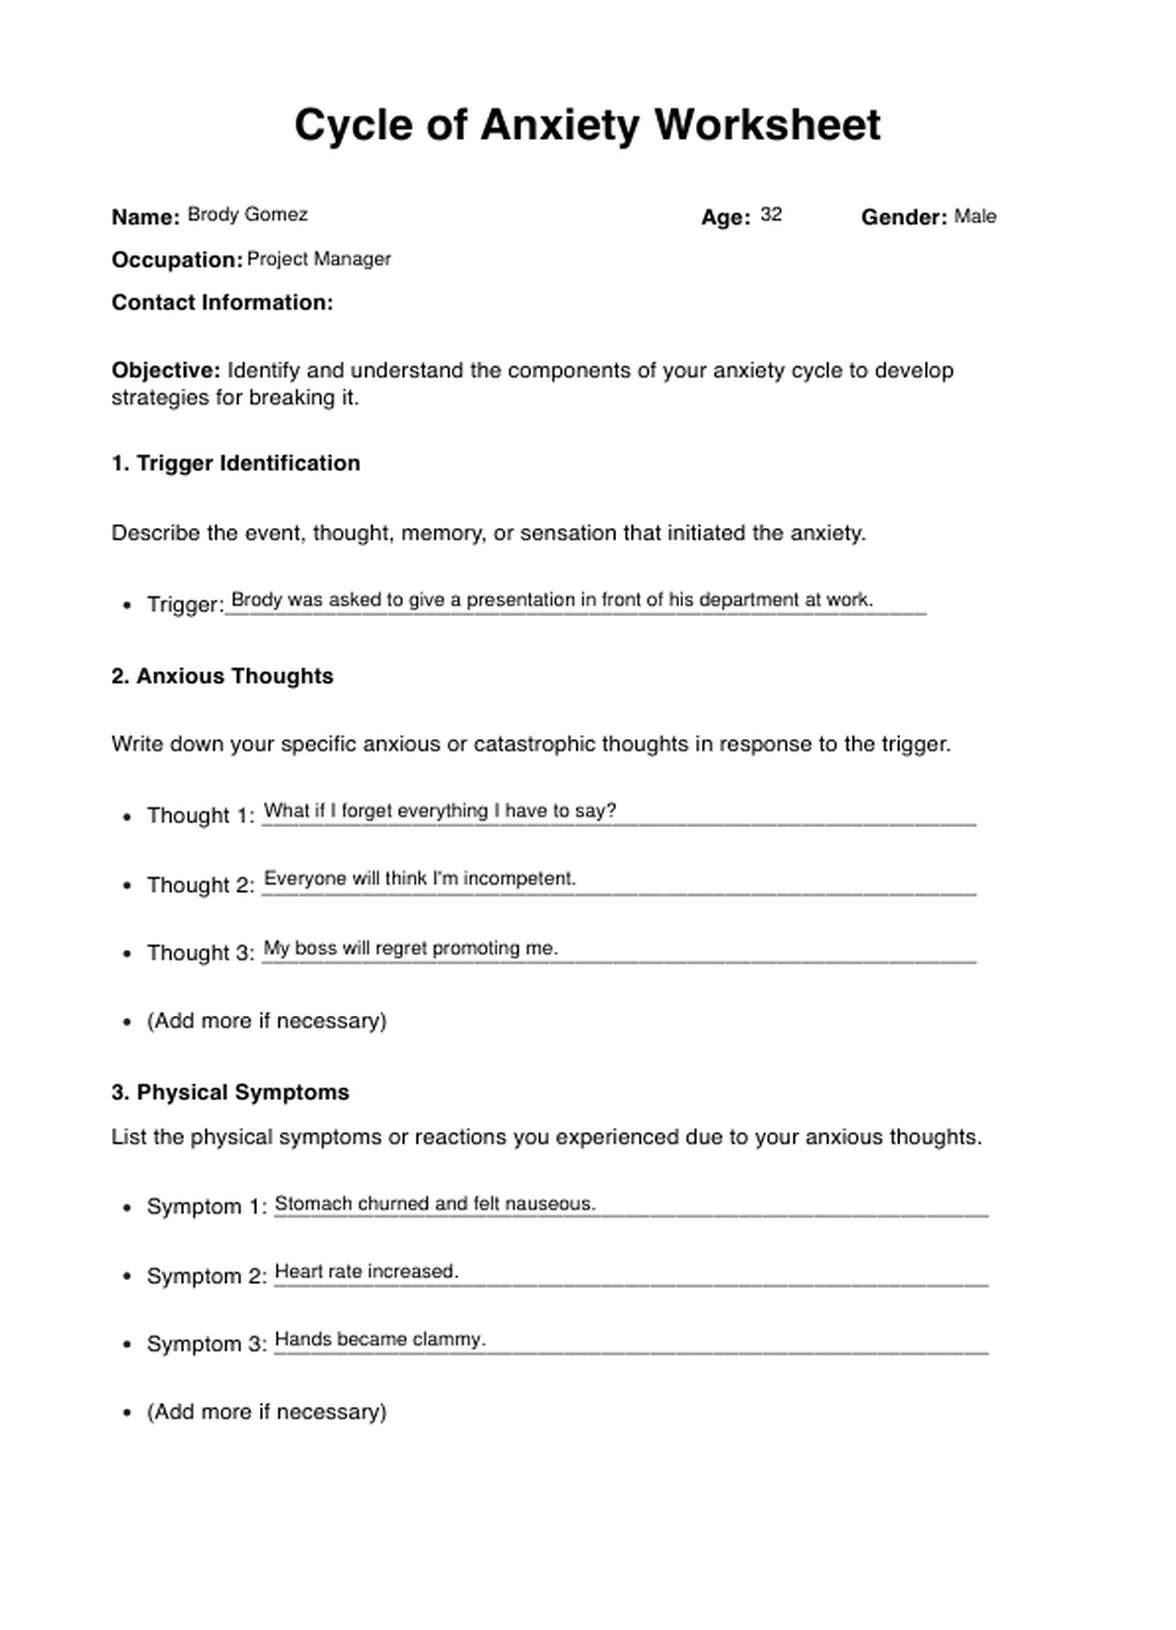 Cycle Of Anxiety Worksheets PDF Example